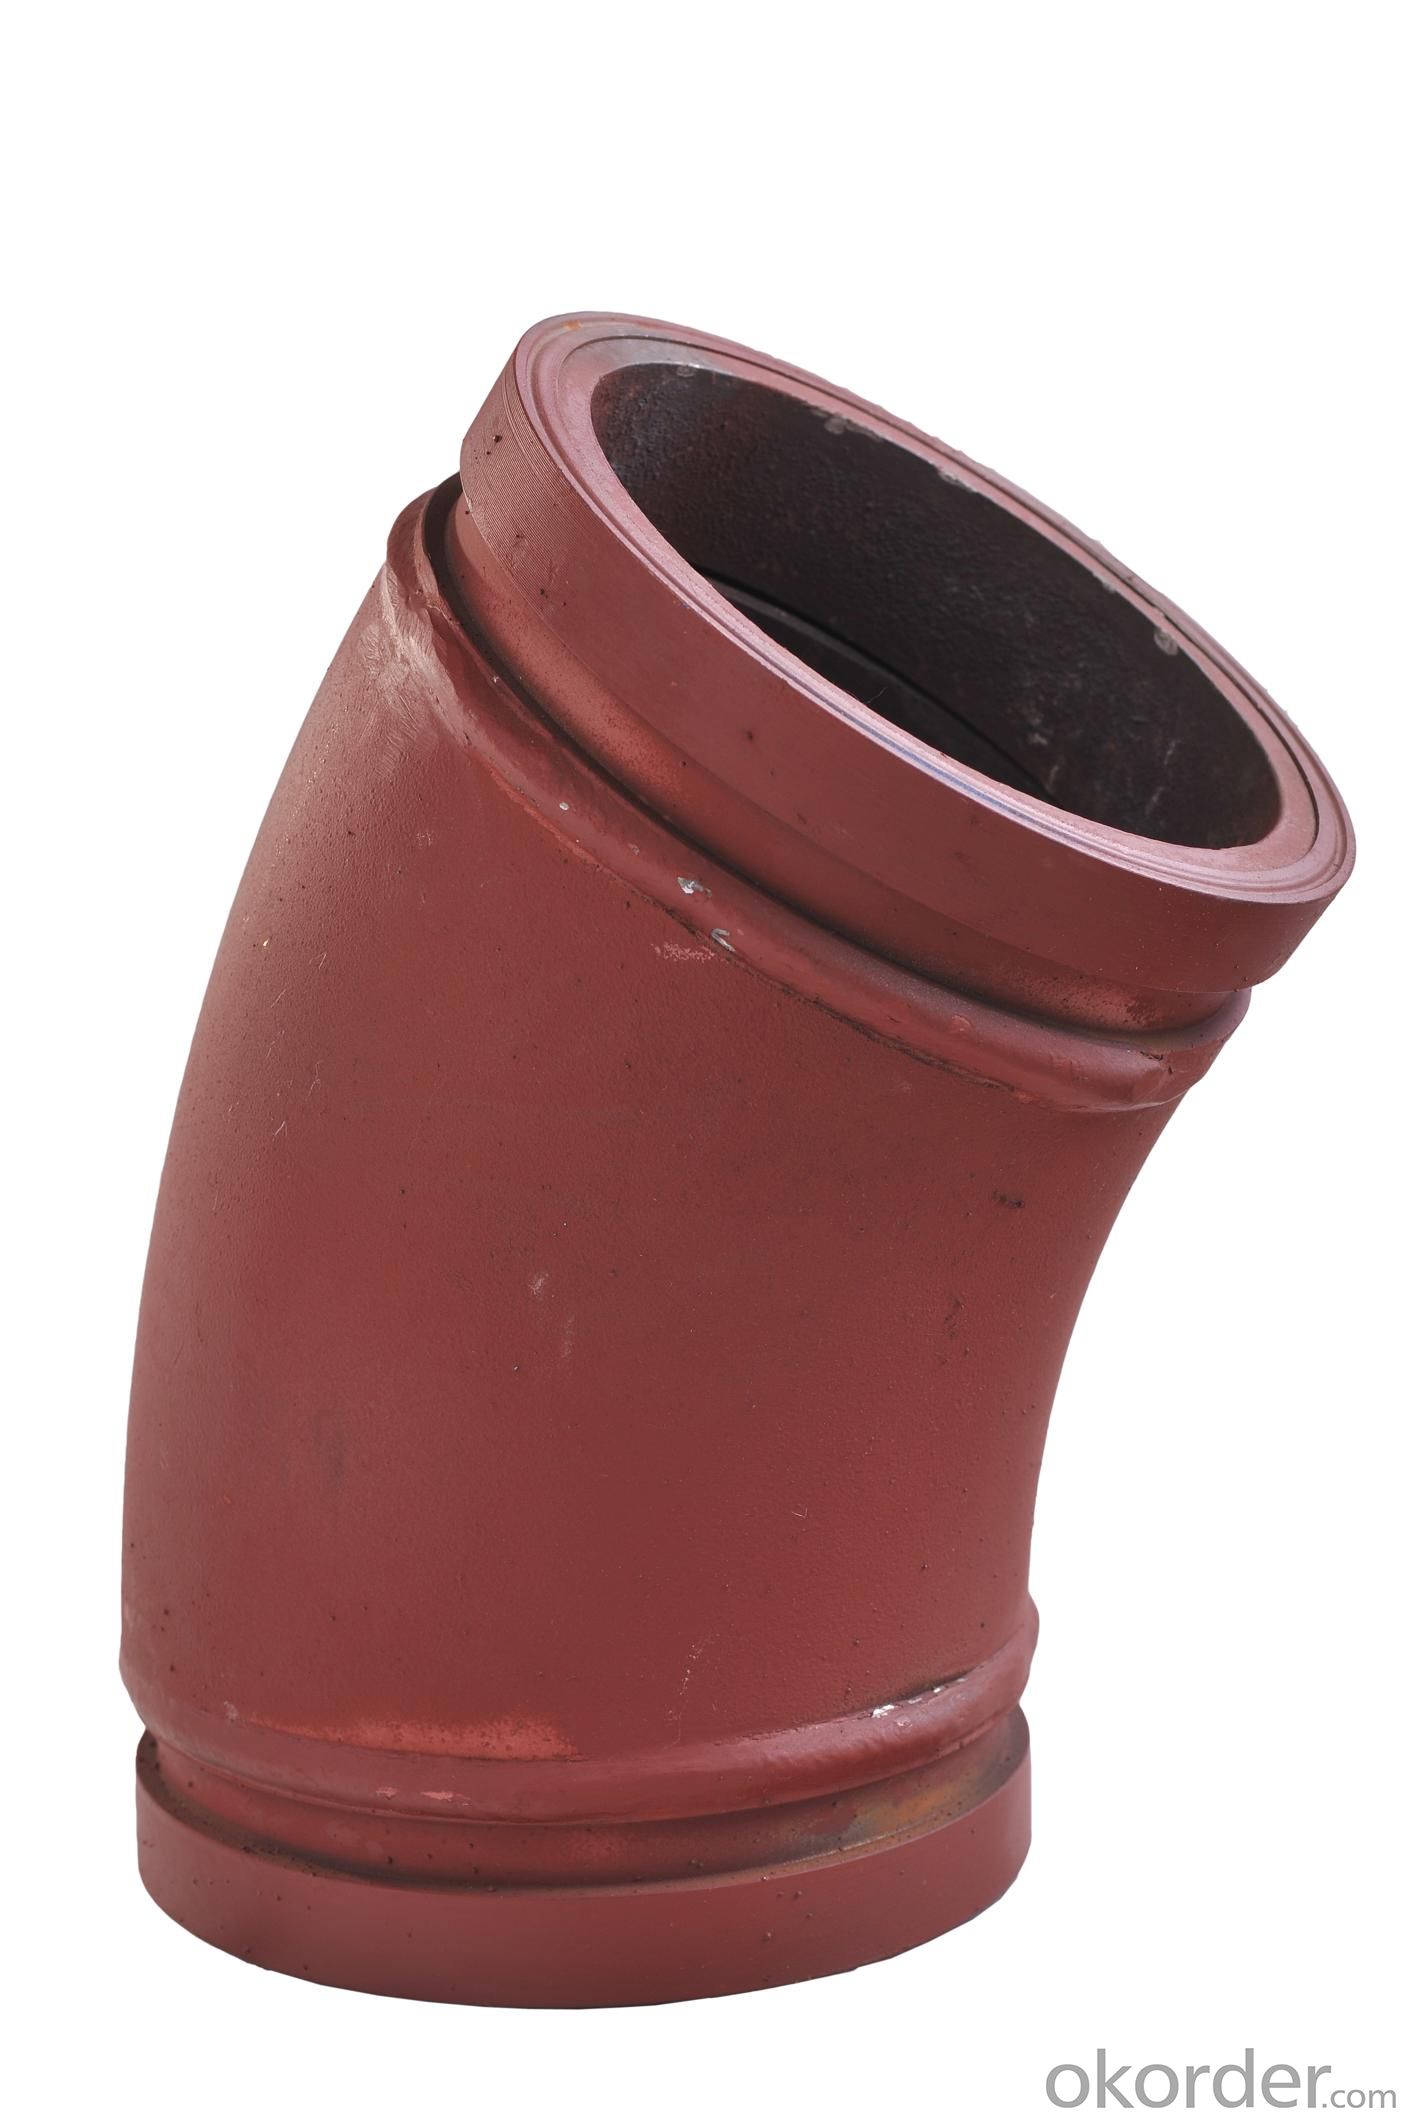 Twin Wall Elbow for Concrete Pump R275 30DGR